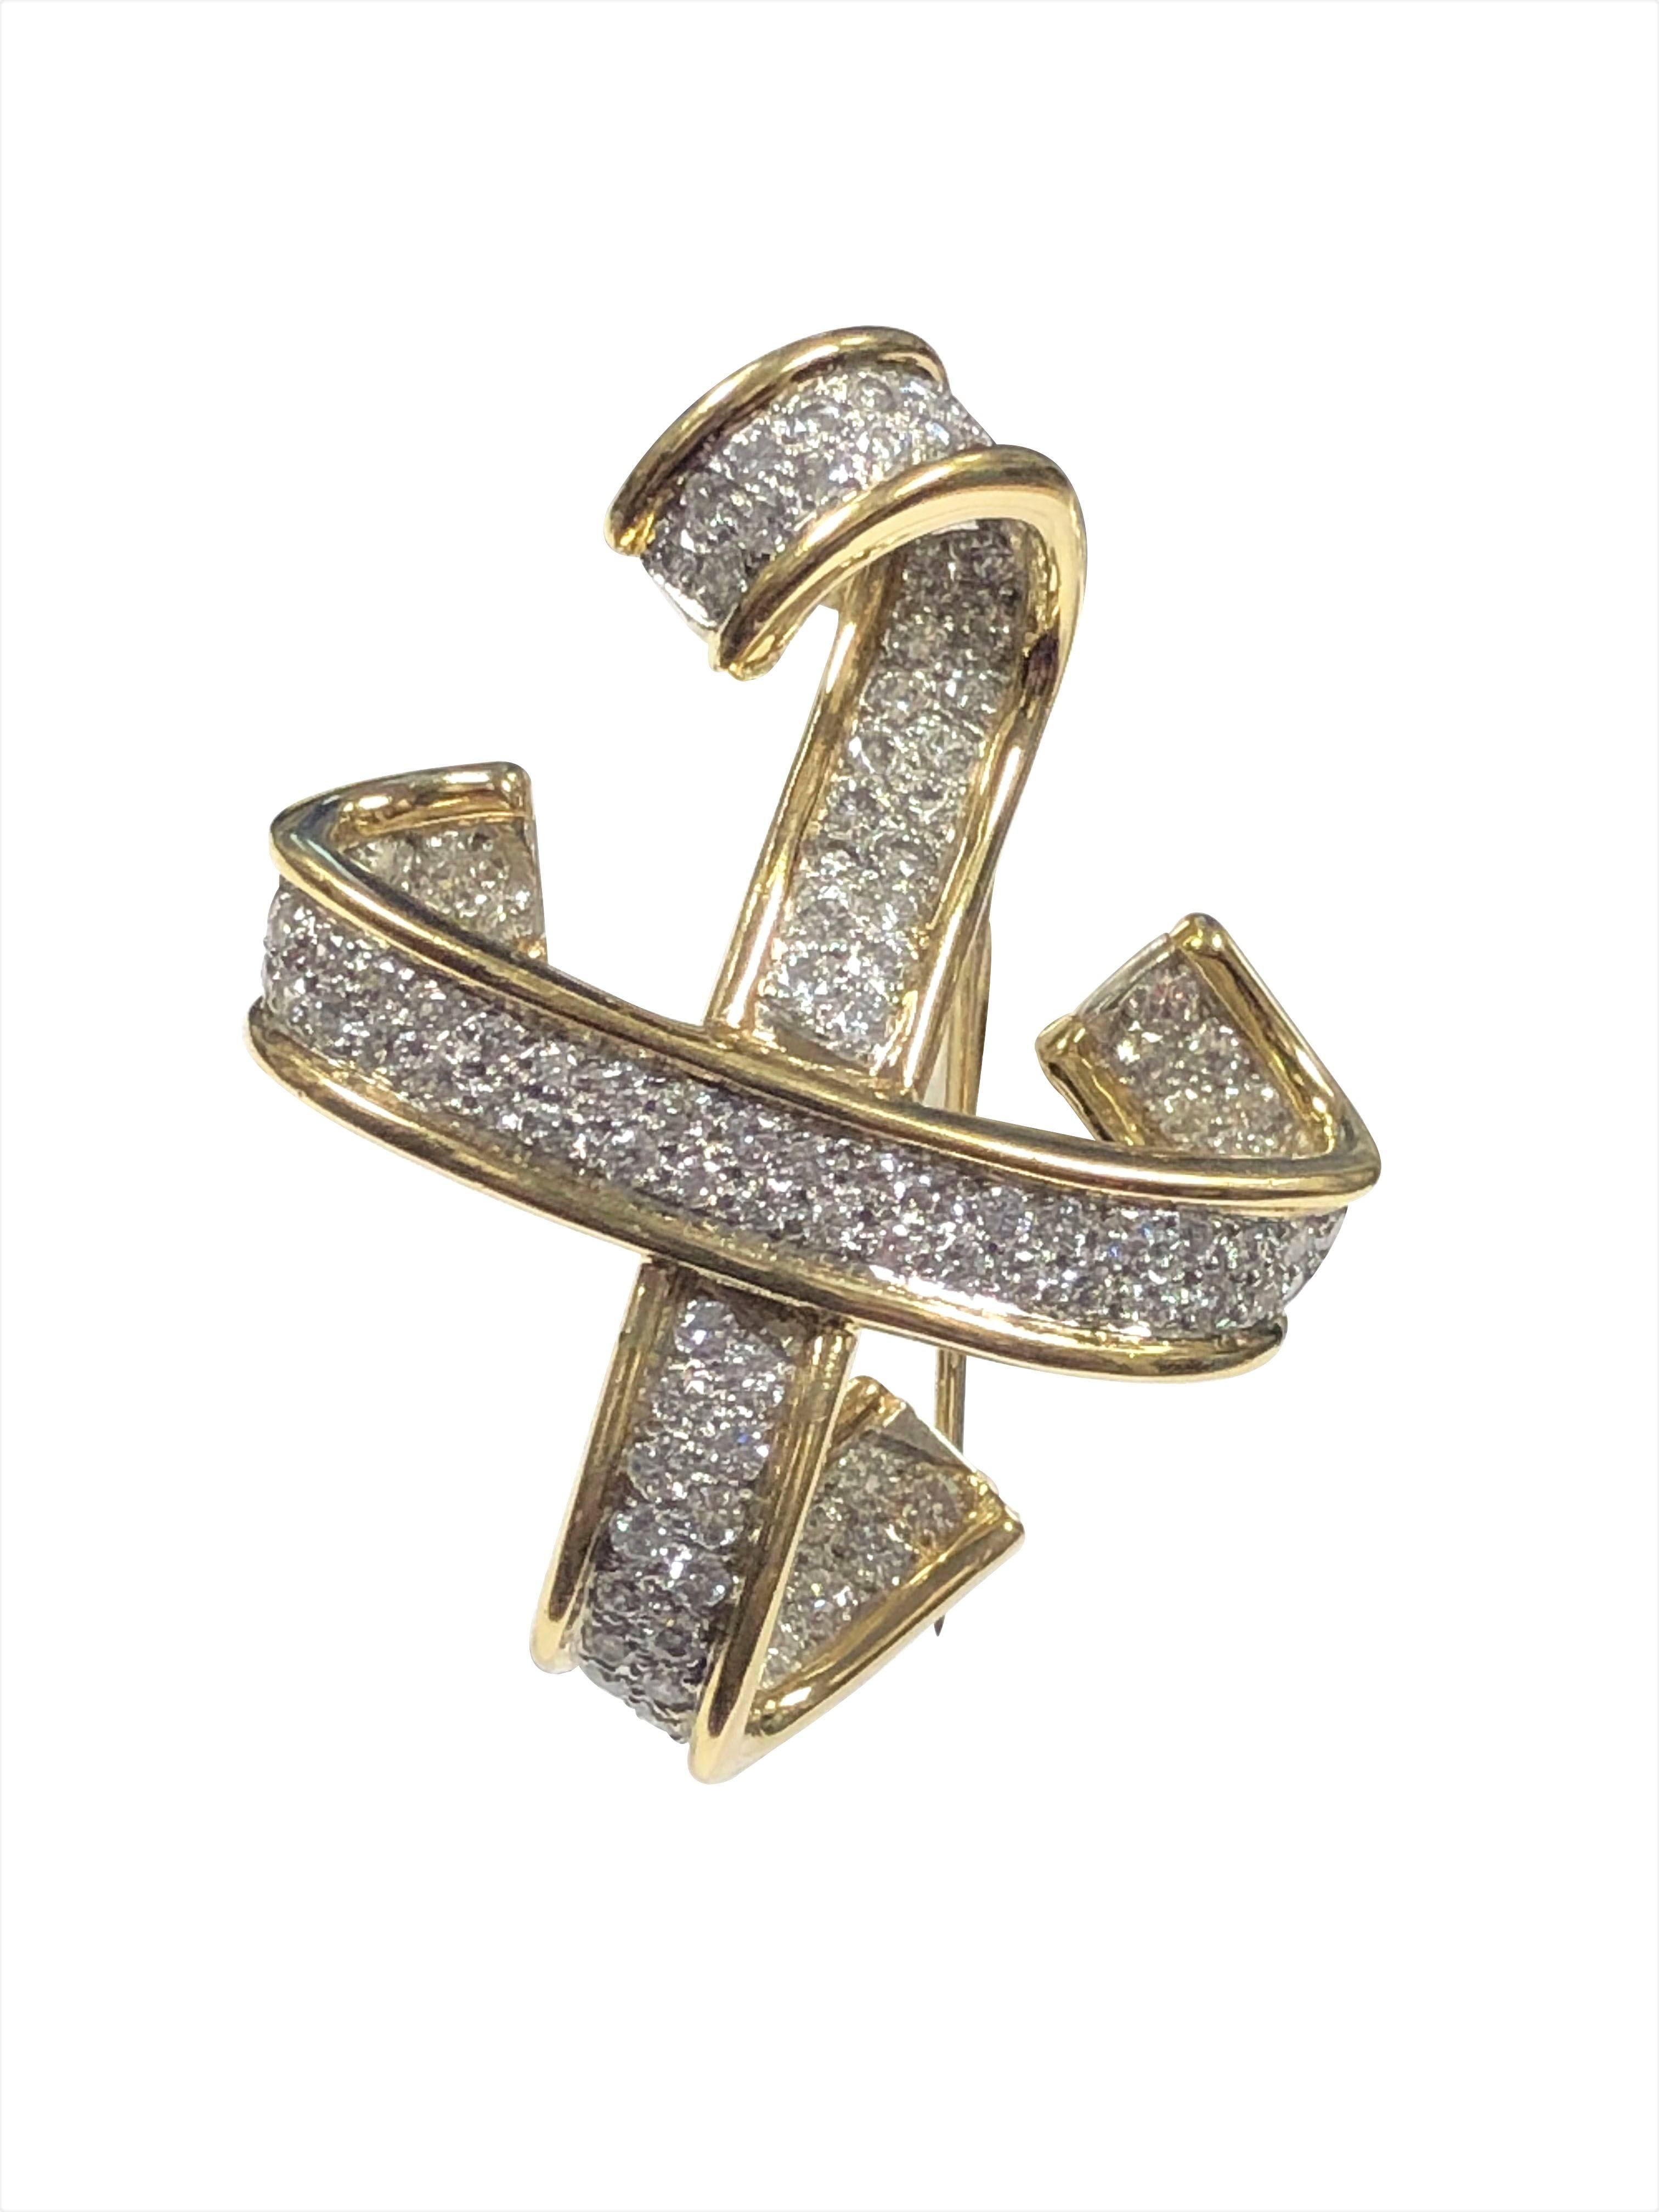 Tiffany & Company Paloma Picasso Diamond and Yellow Gold X Brooch For Sale 1